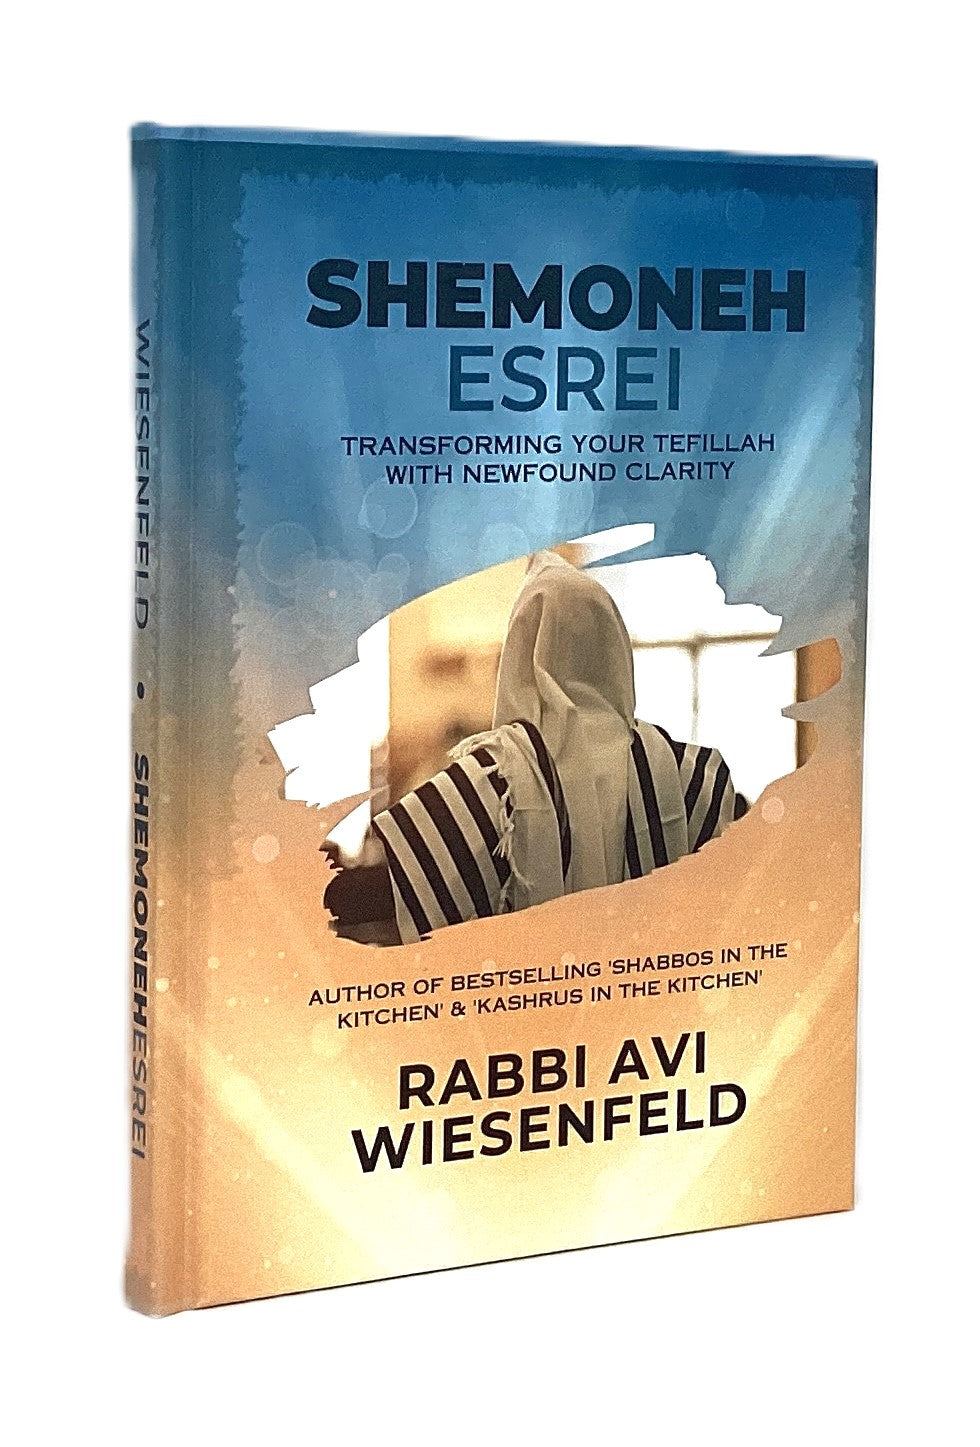 Shemoneh Esrei - Transforming your Tefillah with newfound clarity